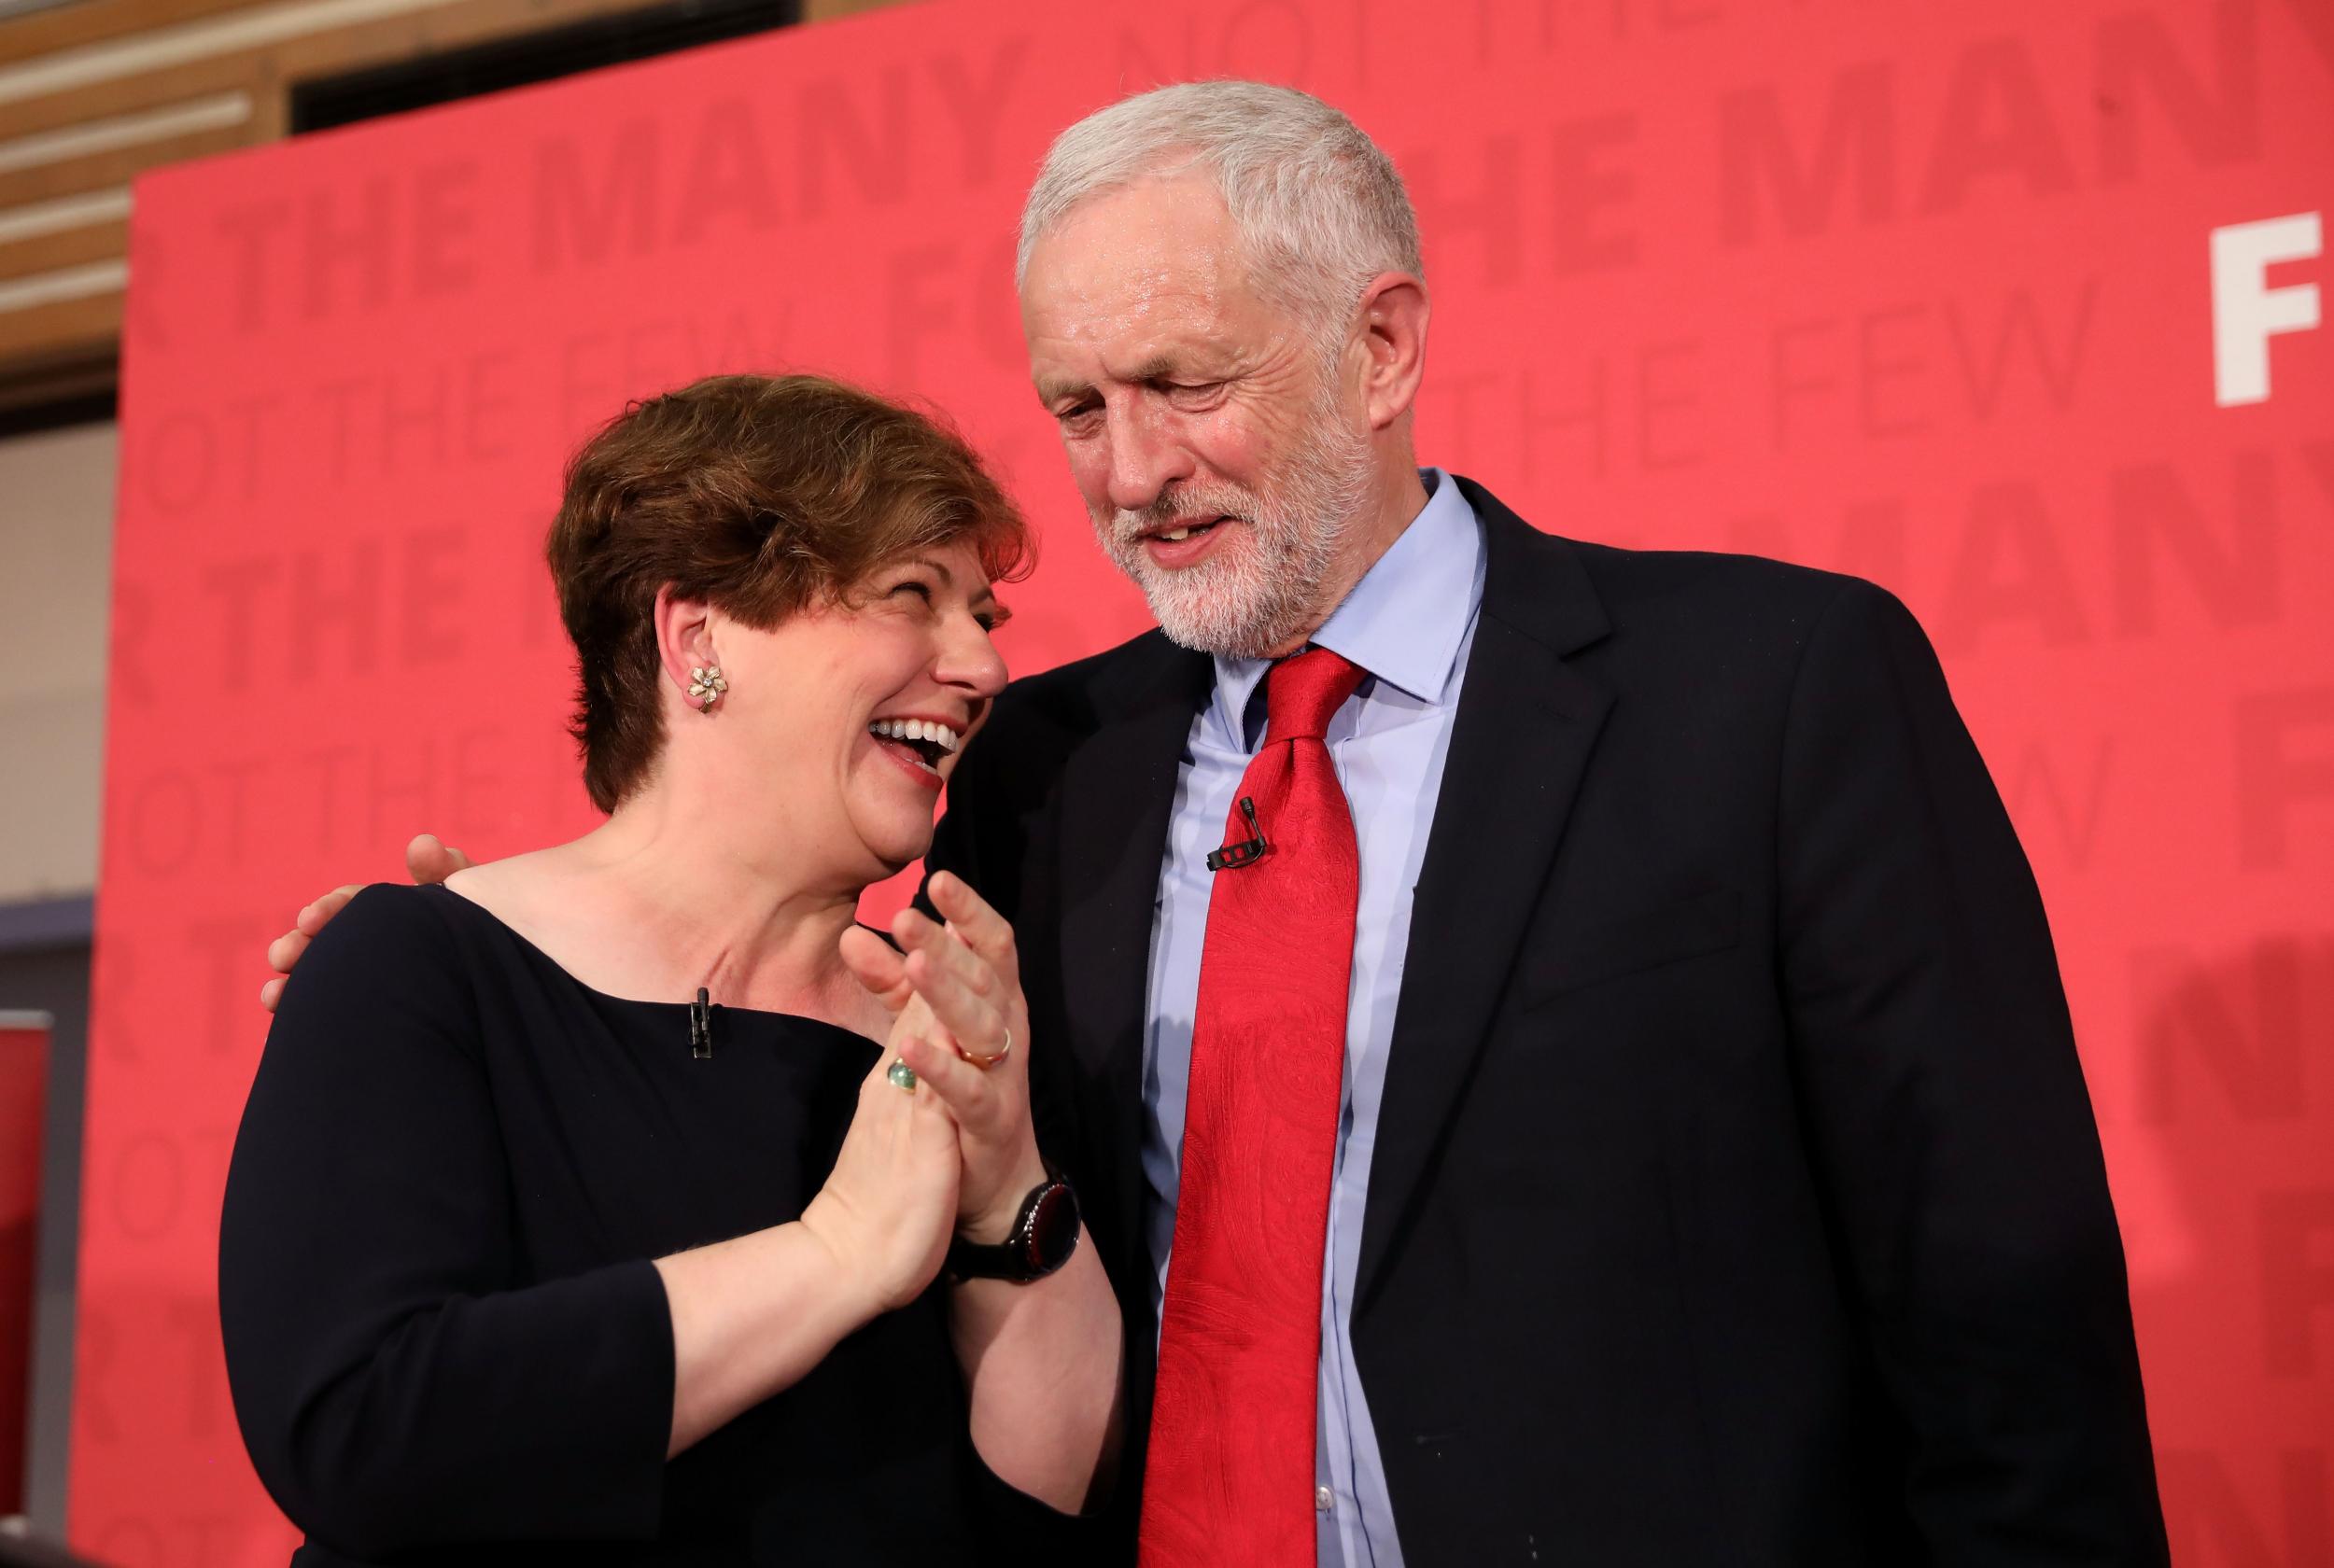 Emily Thornberry and Jeremy Corbyn after the party leader delivered a speech on Labour's plan for Brexit negotiations at Pitsea Leisure Centre on June 1, 2017